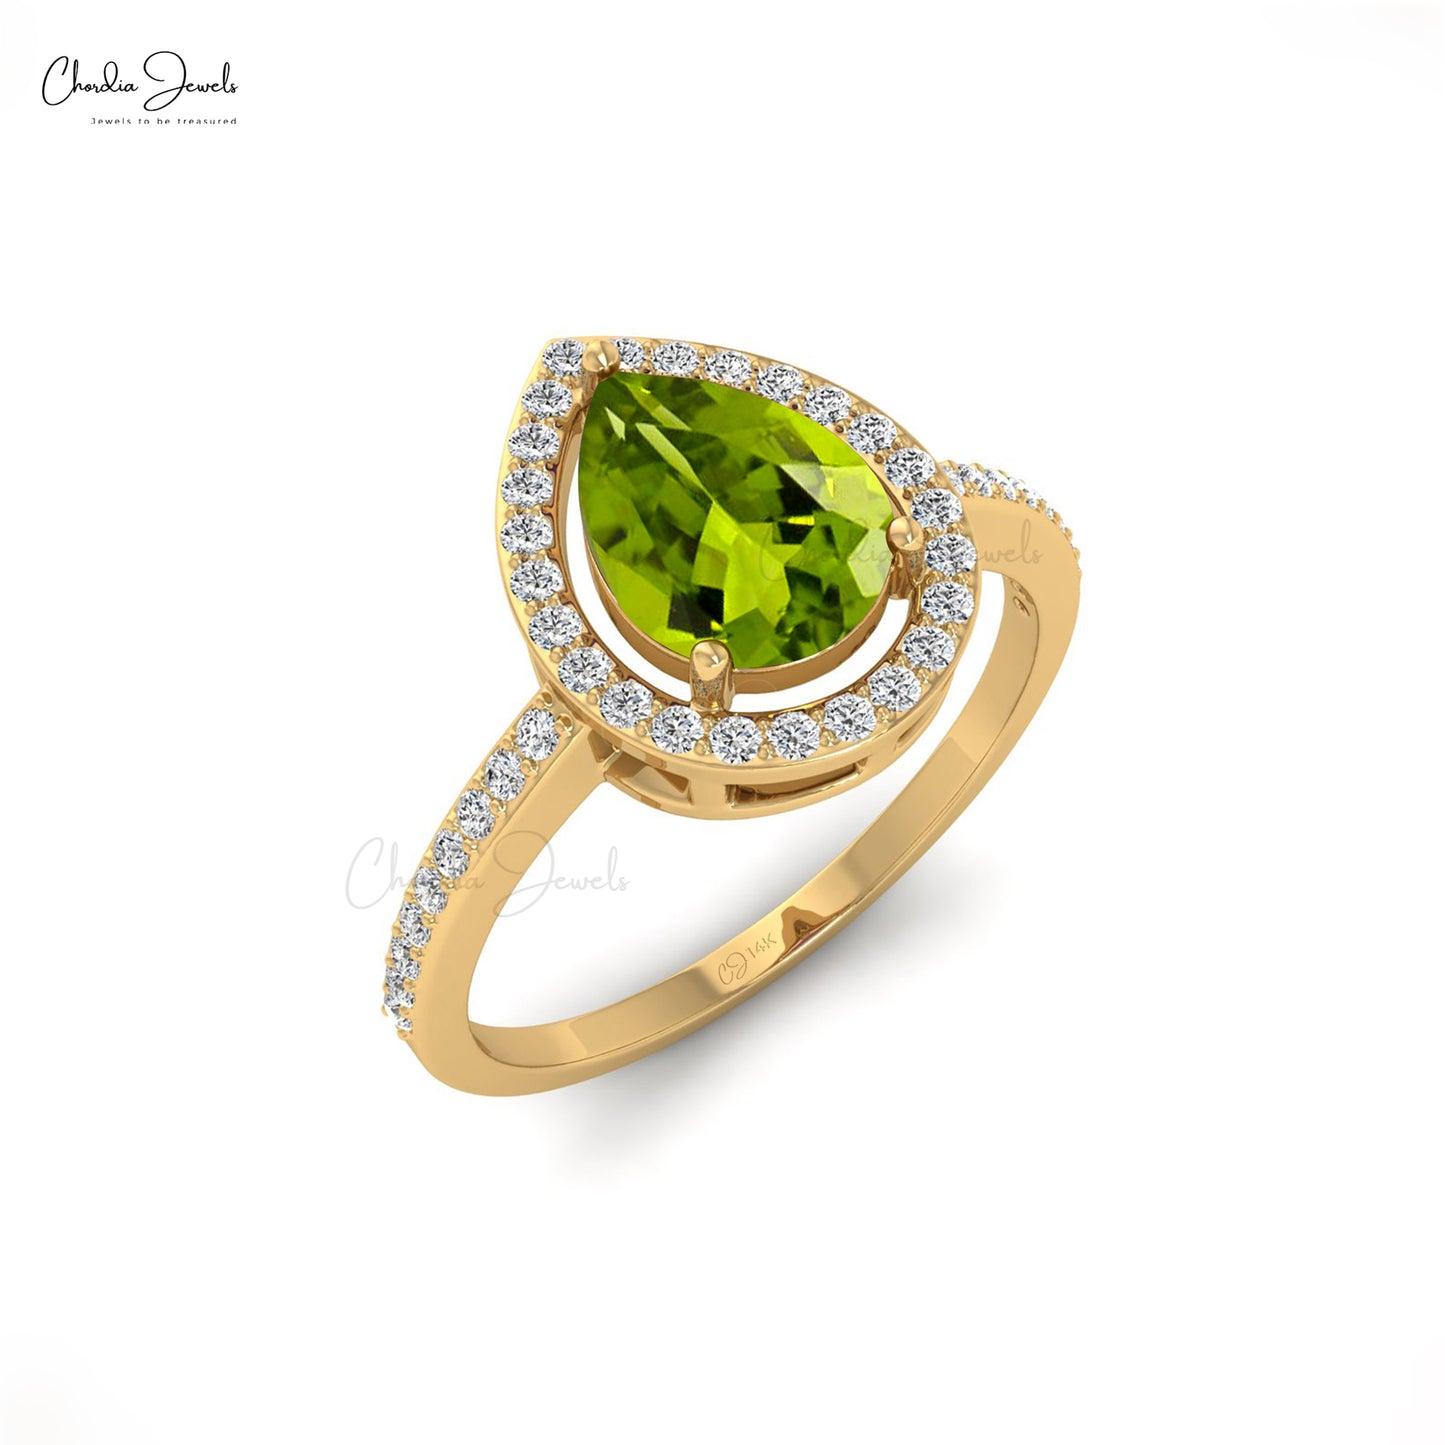 9ct Gold ring with Peridot set in claws